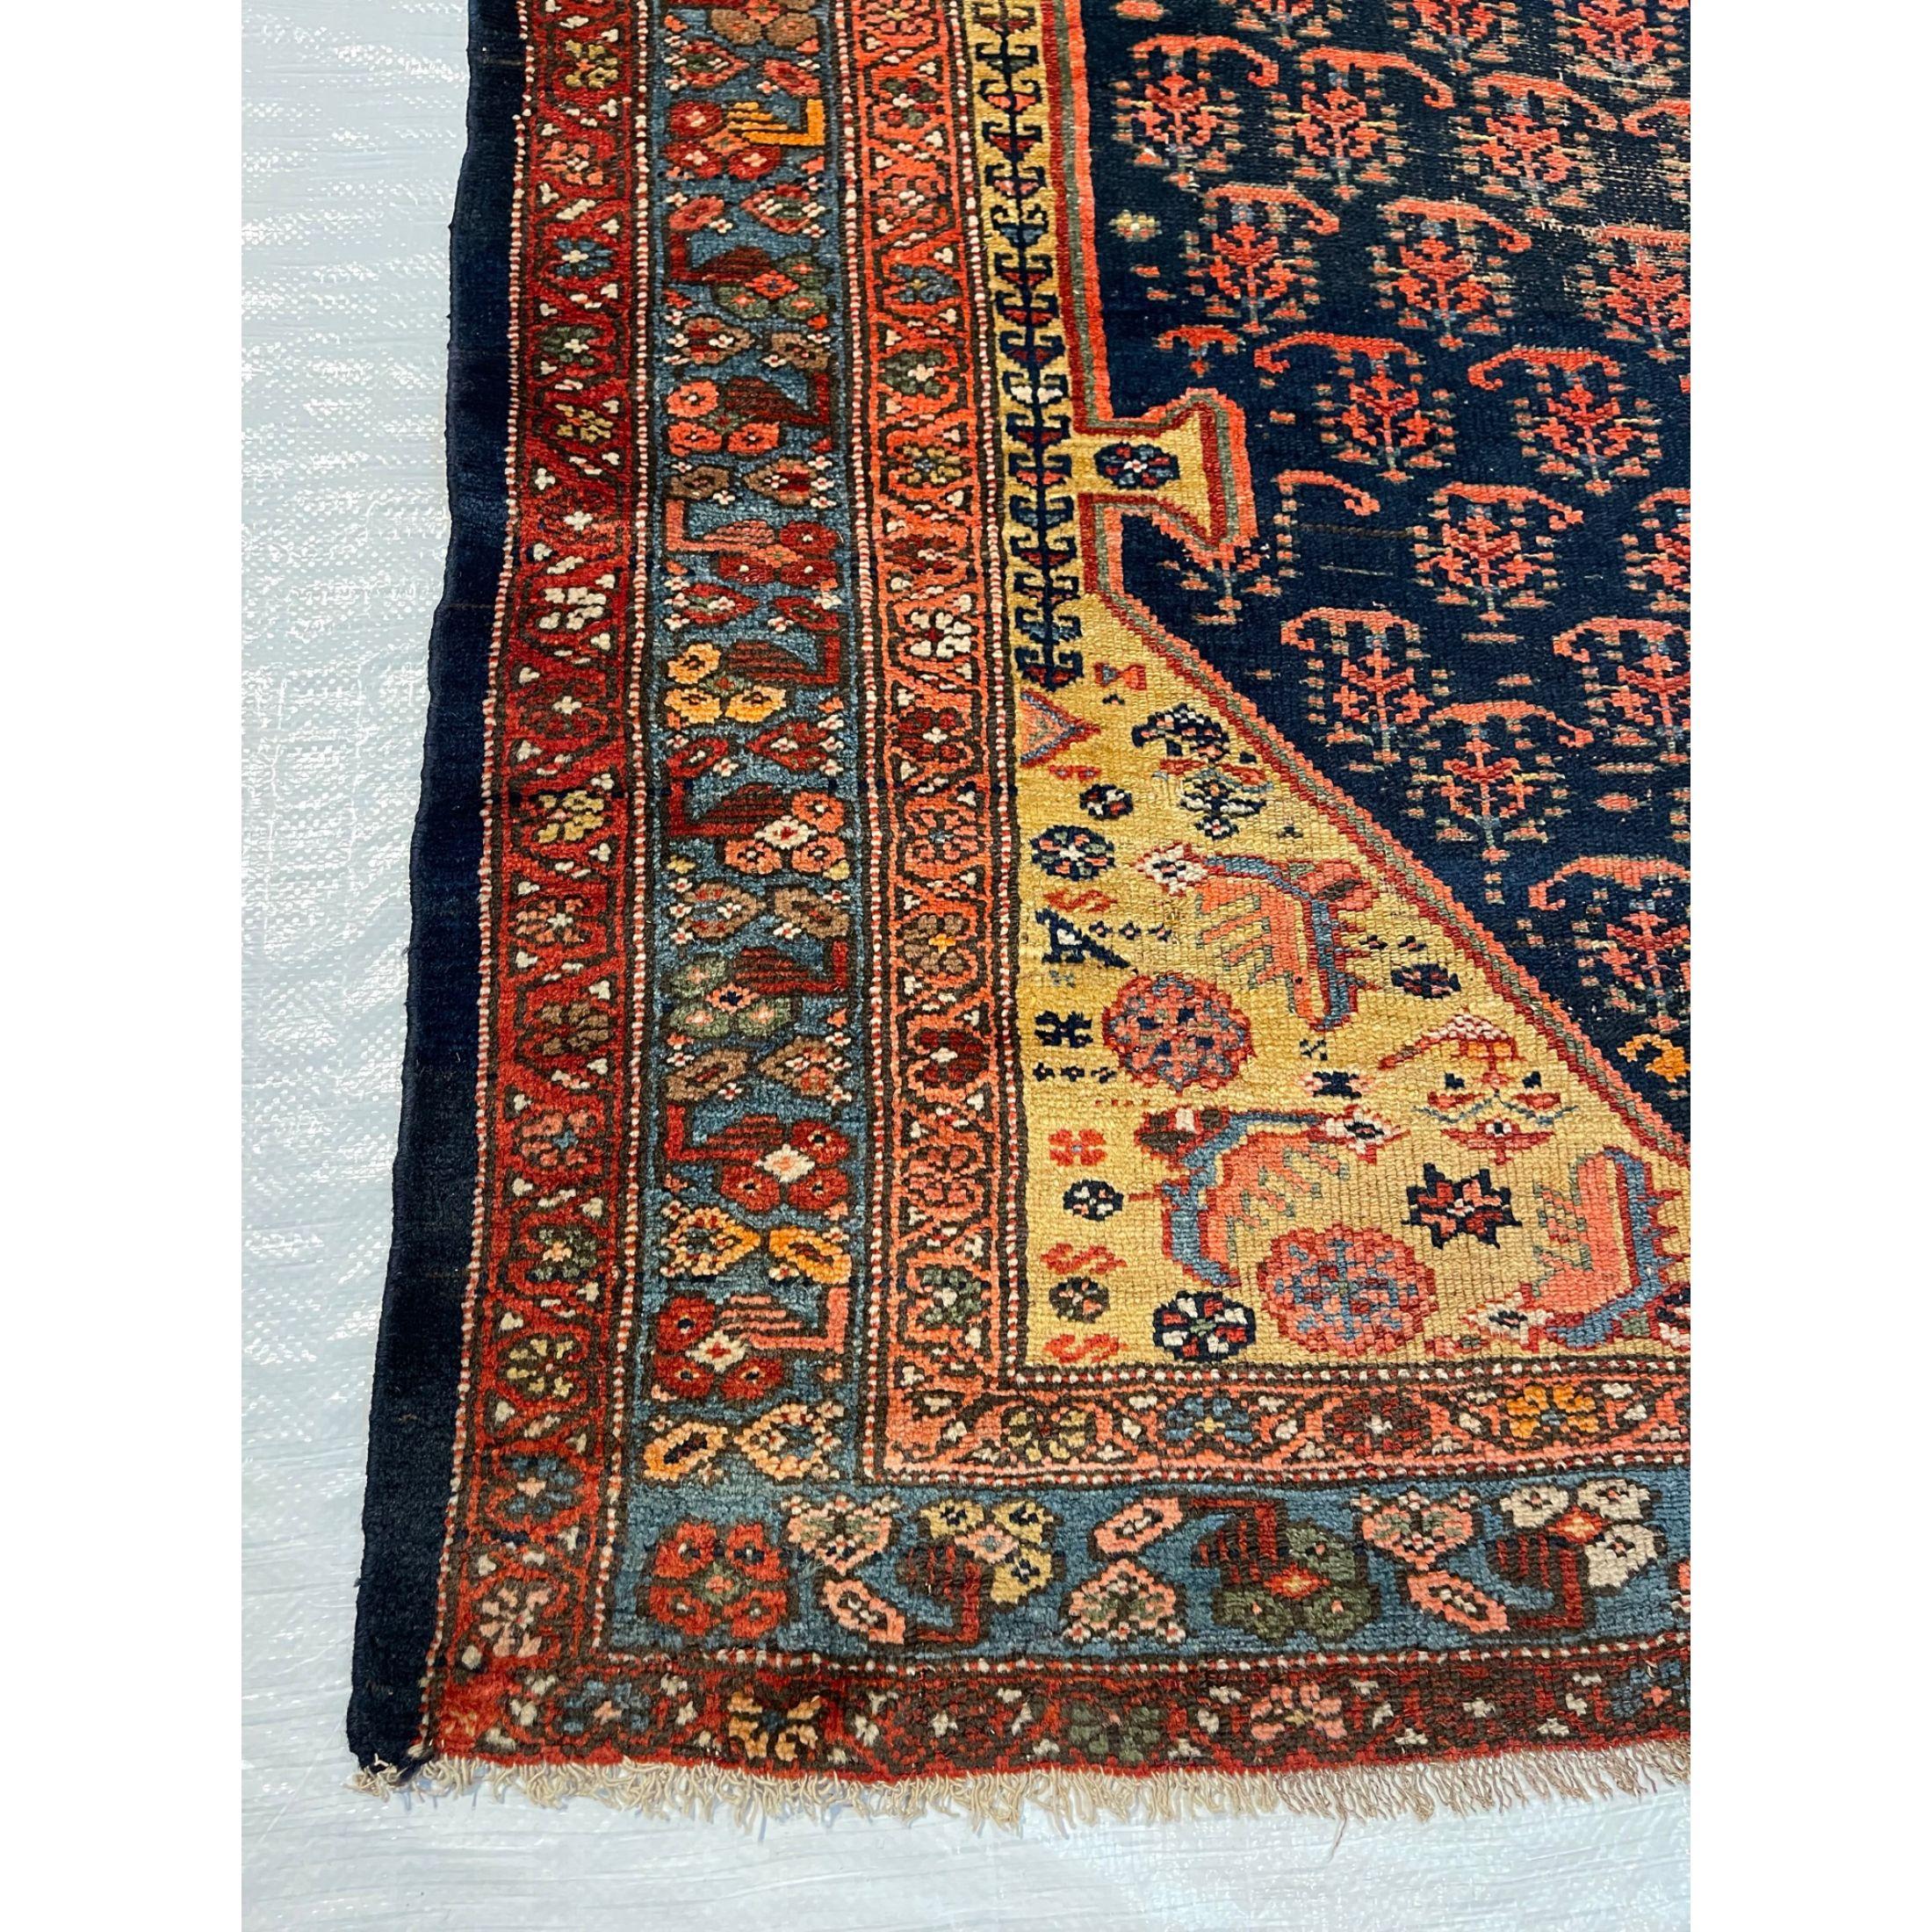 The city of Zanjan lies in the north-western area of Iran, this ancient city sprung up through salt mining in the area and was an important stop in the Silk Routes of Iran. Zanjan carpets are renowned for their rich, bright and exotic colours,